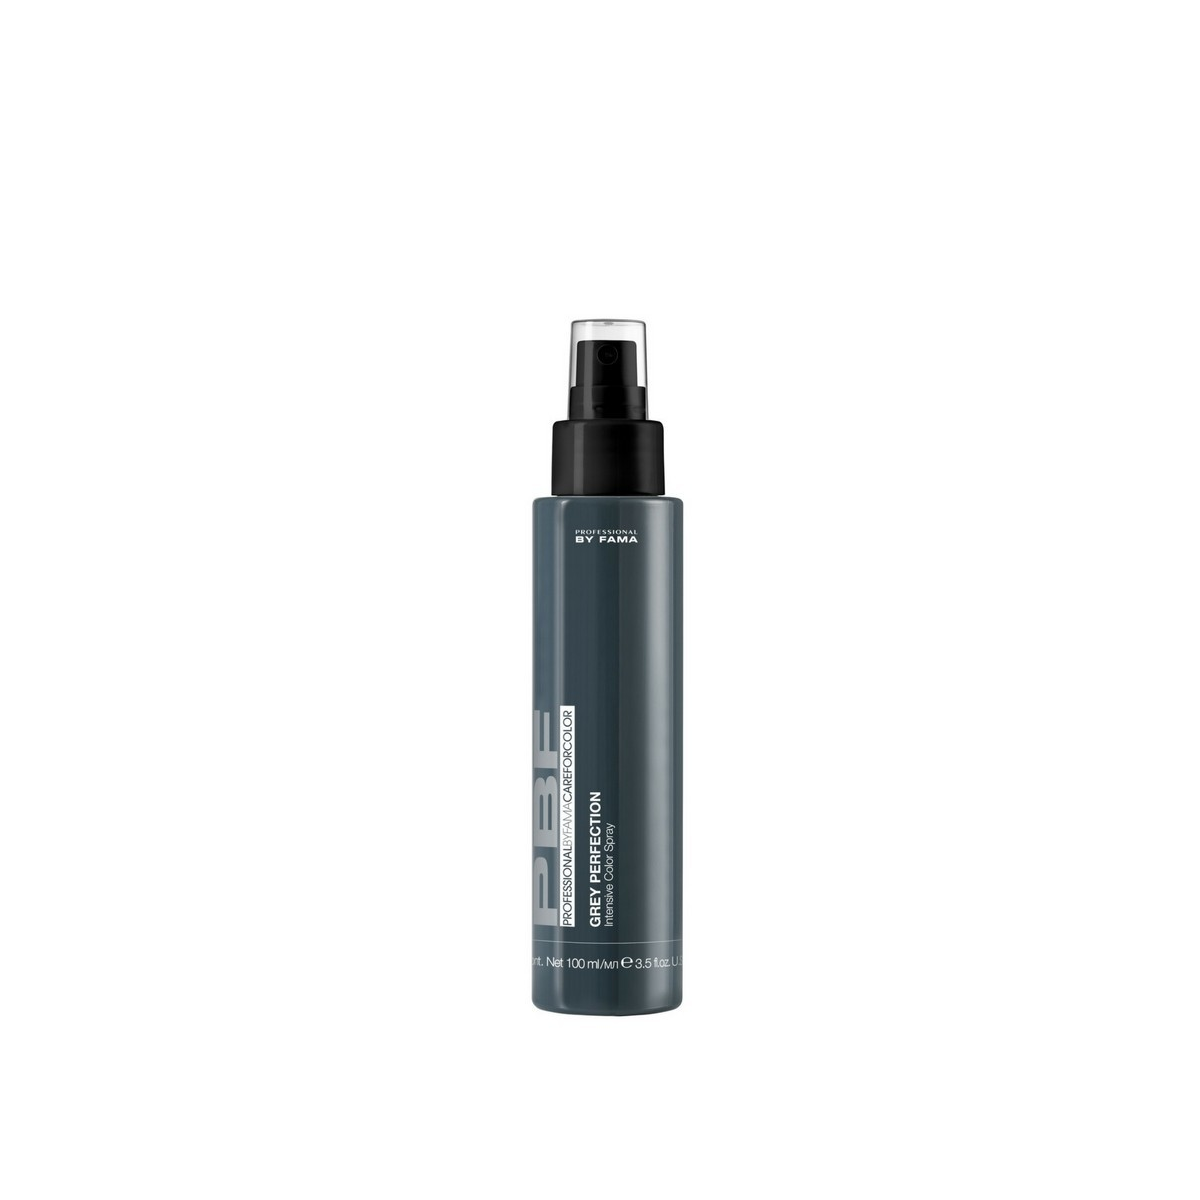 PROFESSIONAL BY FAMA - PBF - CARE FOR COLOR - GREY PERFECTION (100ml) Spray intensificante